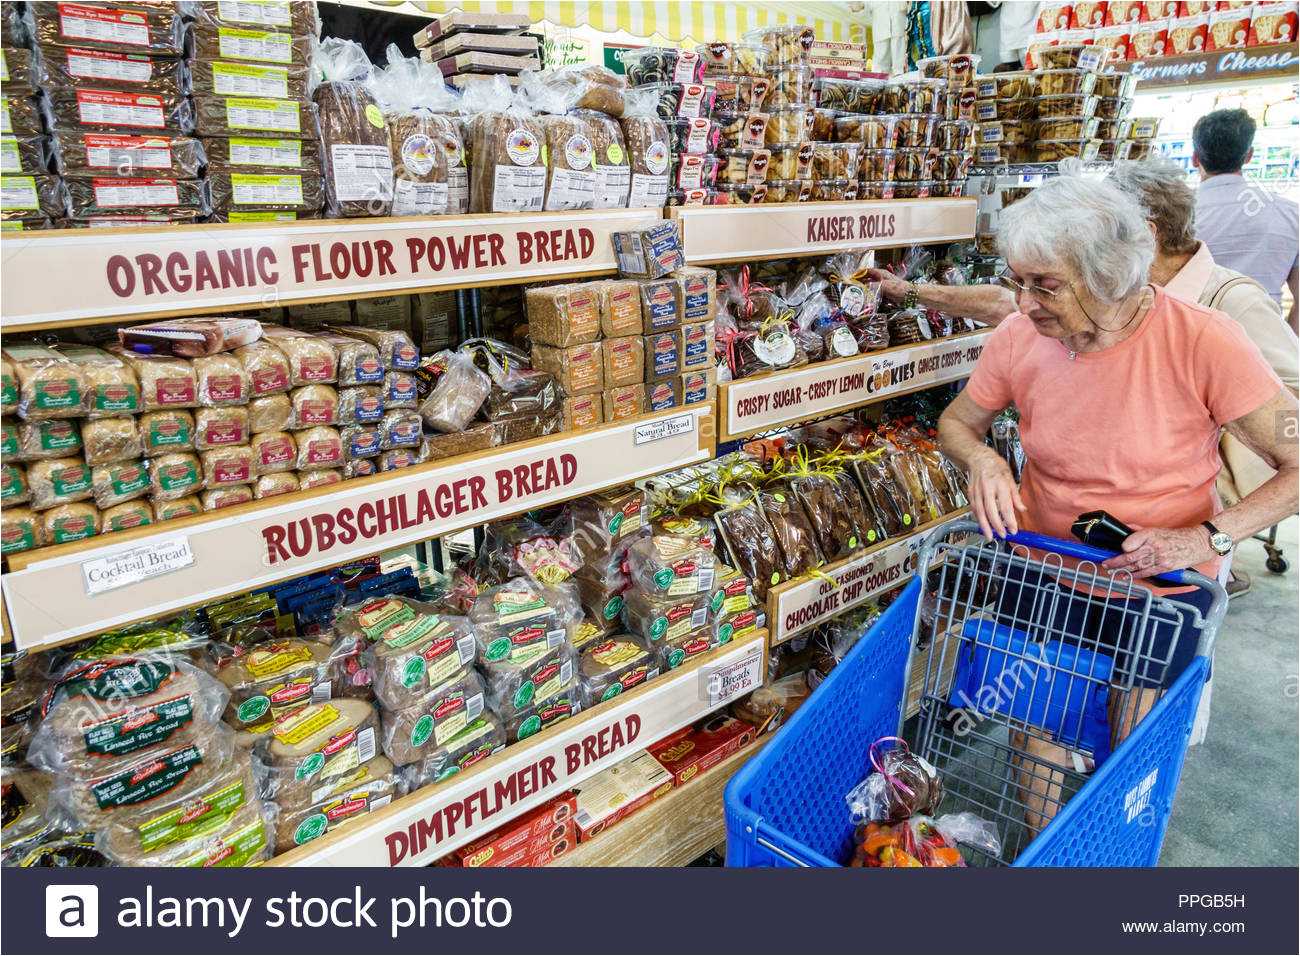 delray beach florida the boys farmers market interior shopping food grocery groceries store shelves display sale